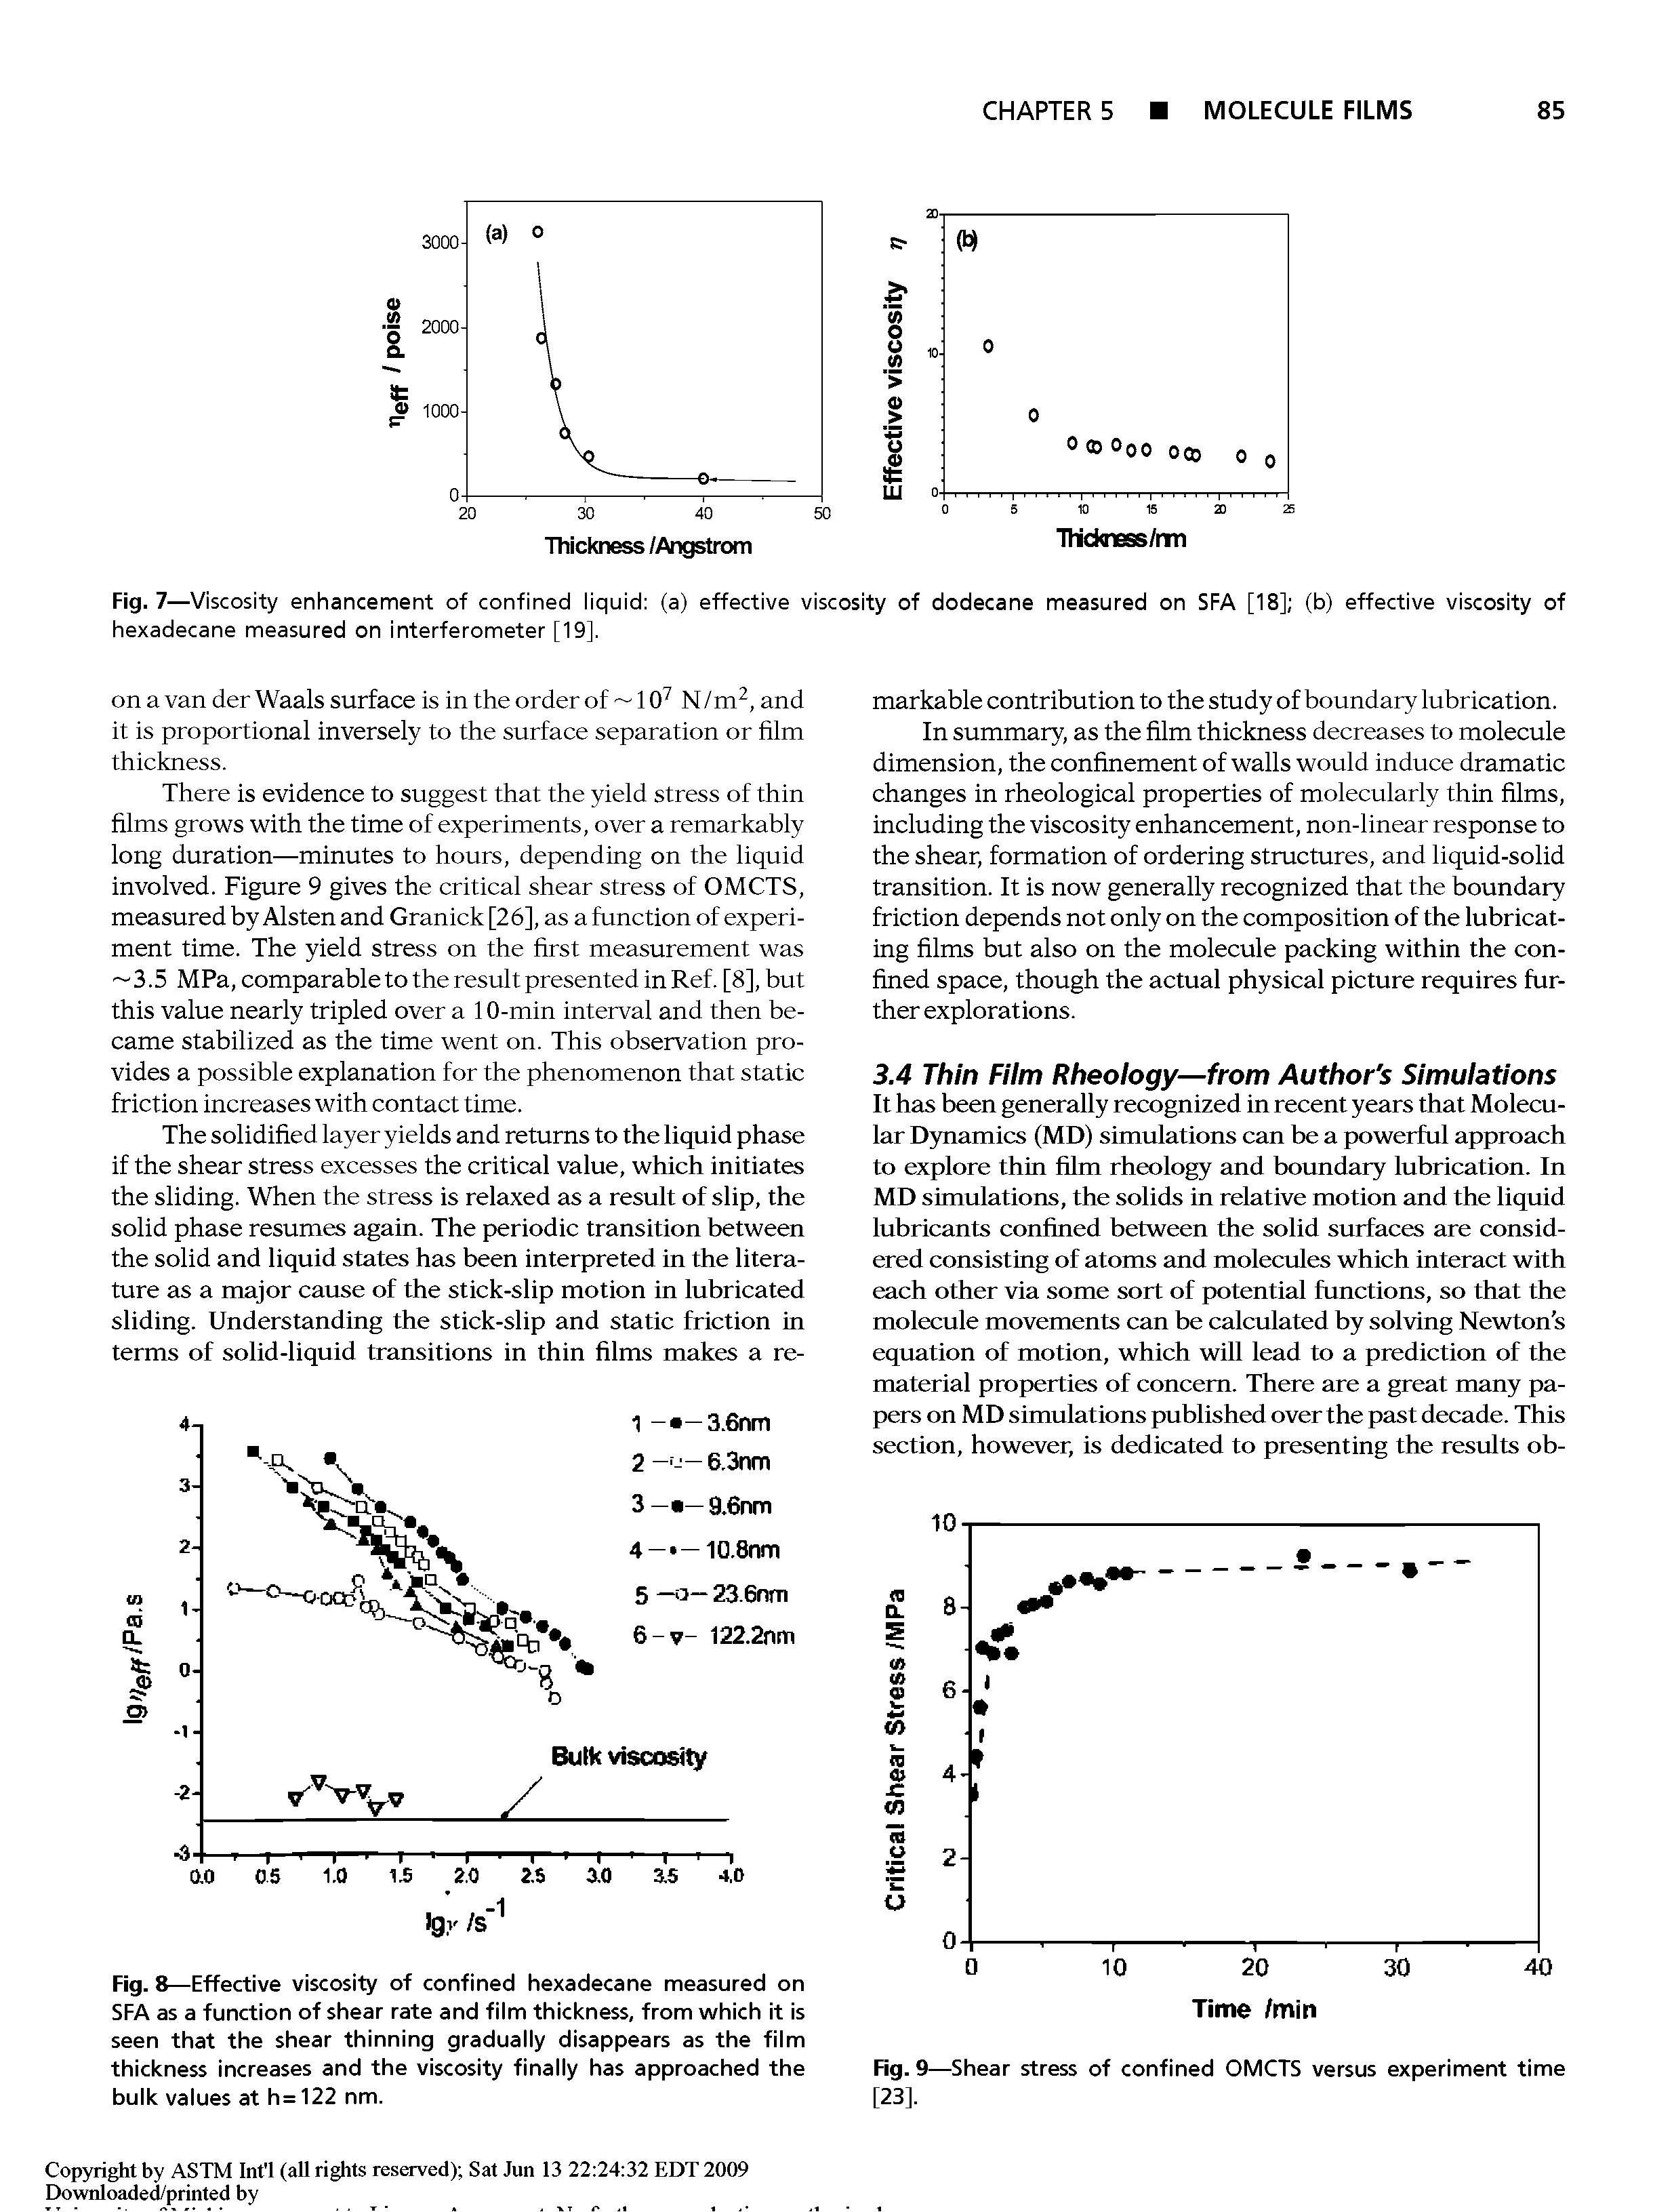 Fig. 8—Effective viscosity of confined hexadecane measured on SFA as a function of shear rate and film thickness, from which it is seen that the shear thinning gradually disappears as the film thickness increases and the viscosity finally has approached the bulk values at h=122 nm.